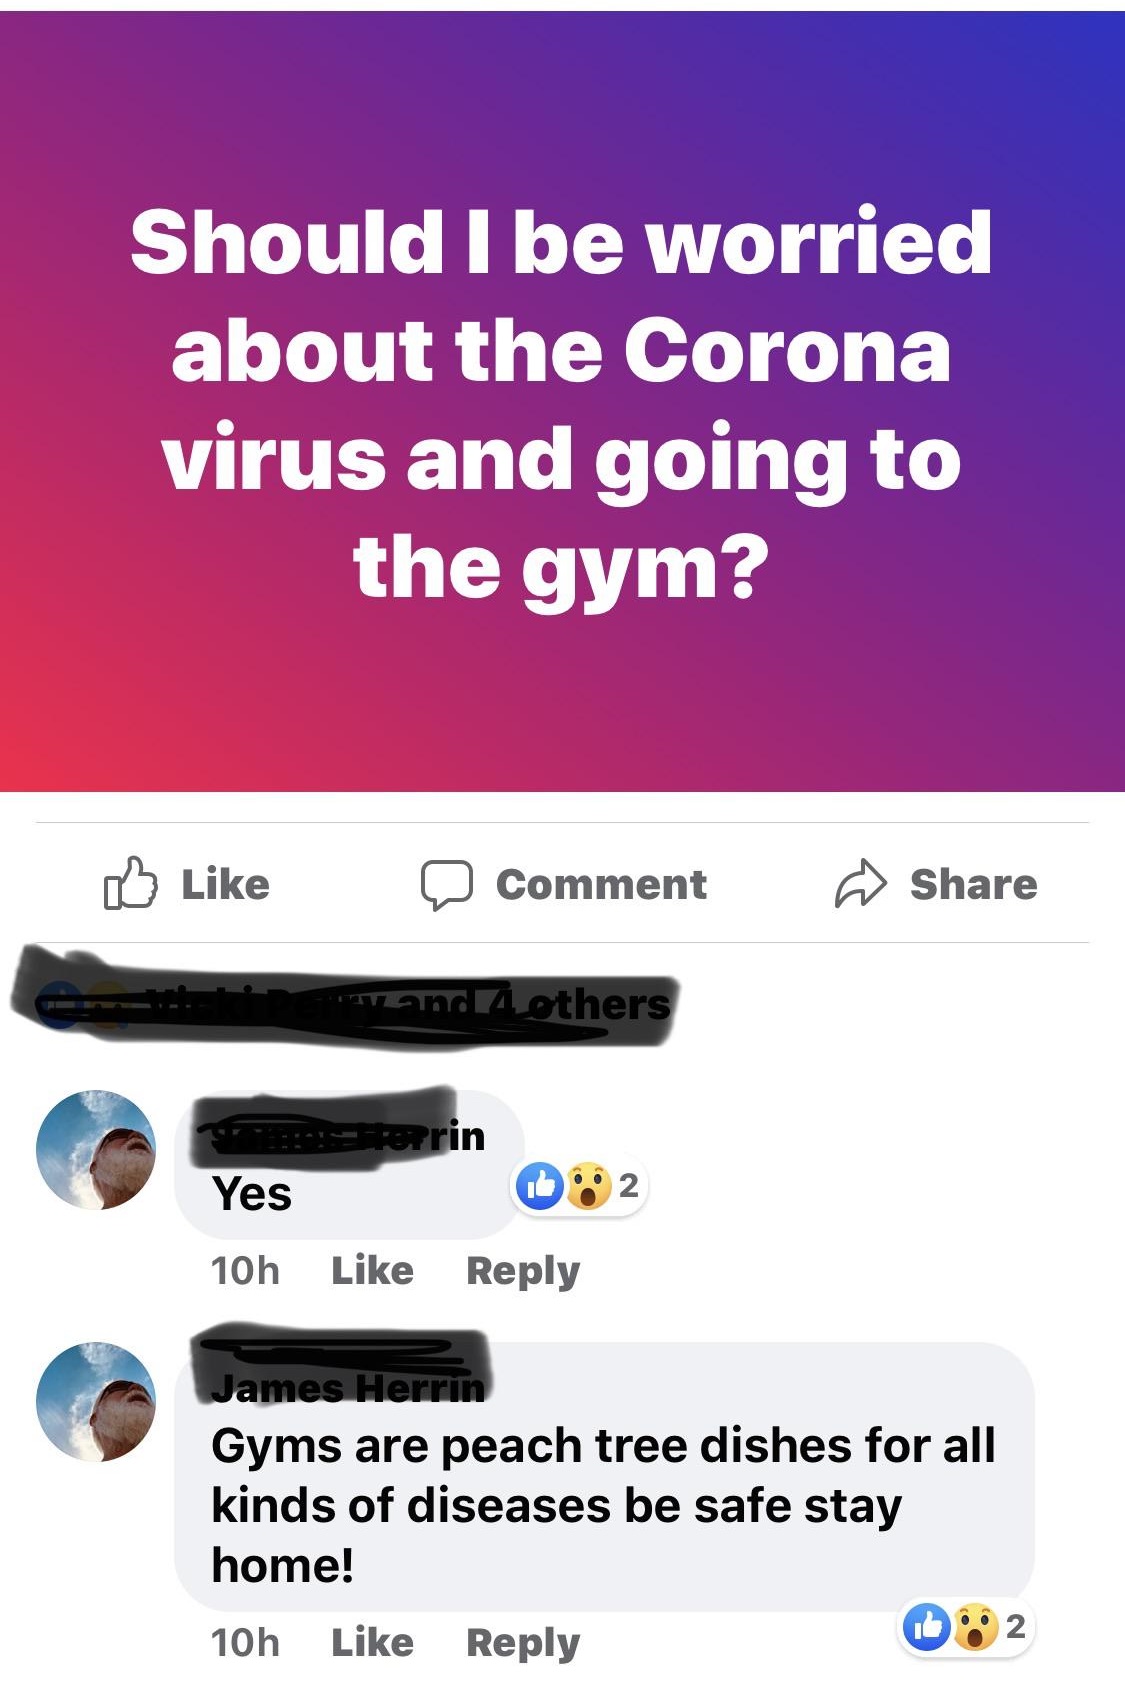 about - Should I be worried about the Corona virus and going to the gym? 0 Comment and others 1 .2 Yes 10h James Herrin Gyms are peach tree dishes for all kinds of diseases be safe stay home! 10h